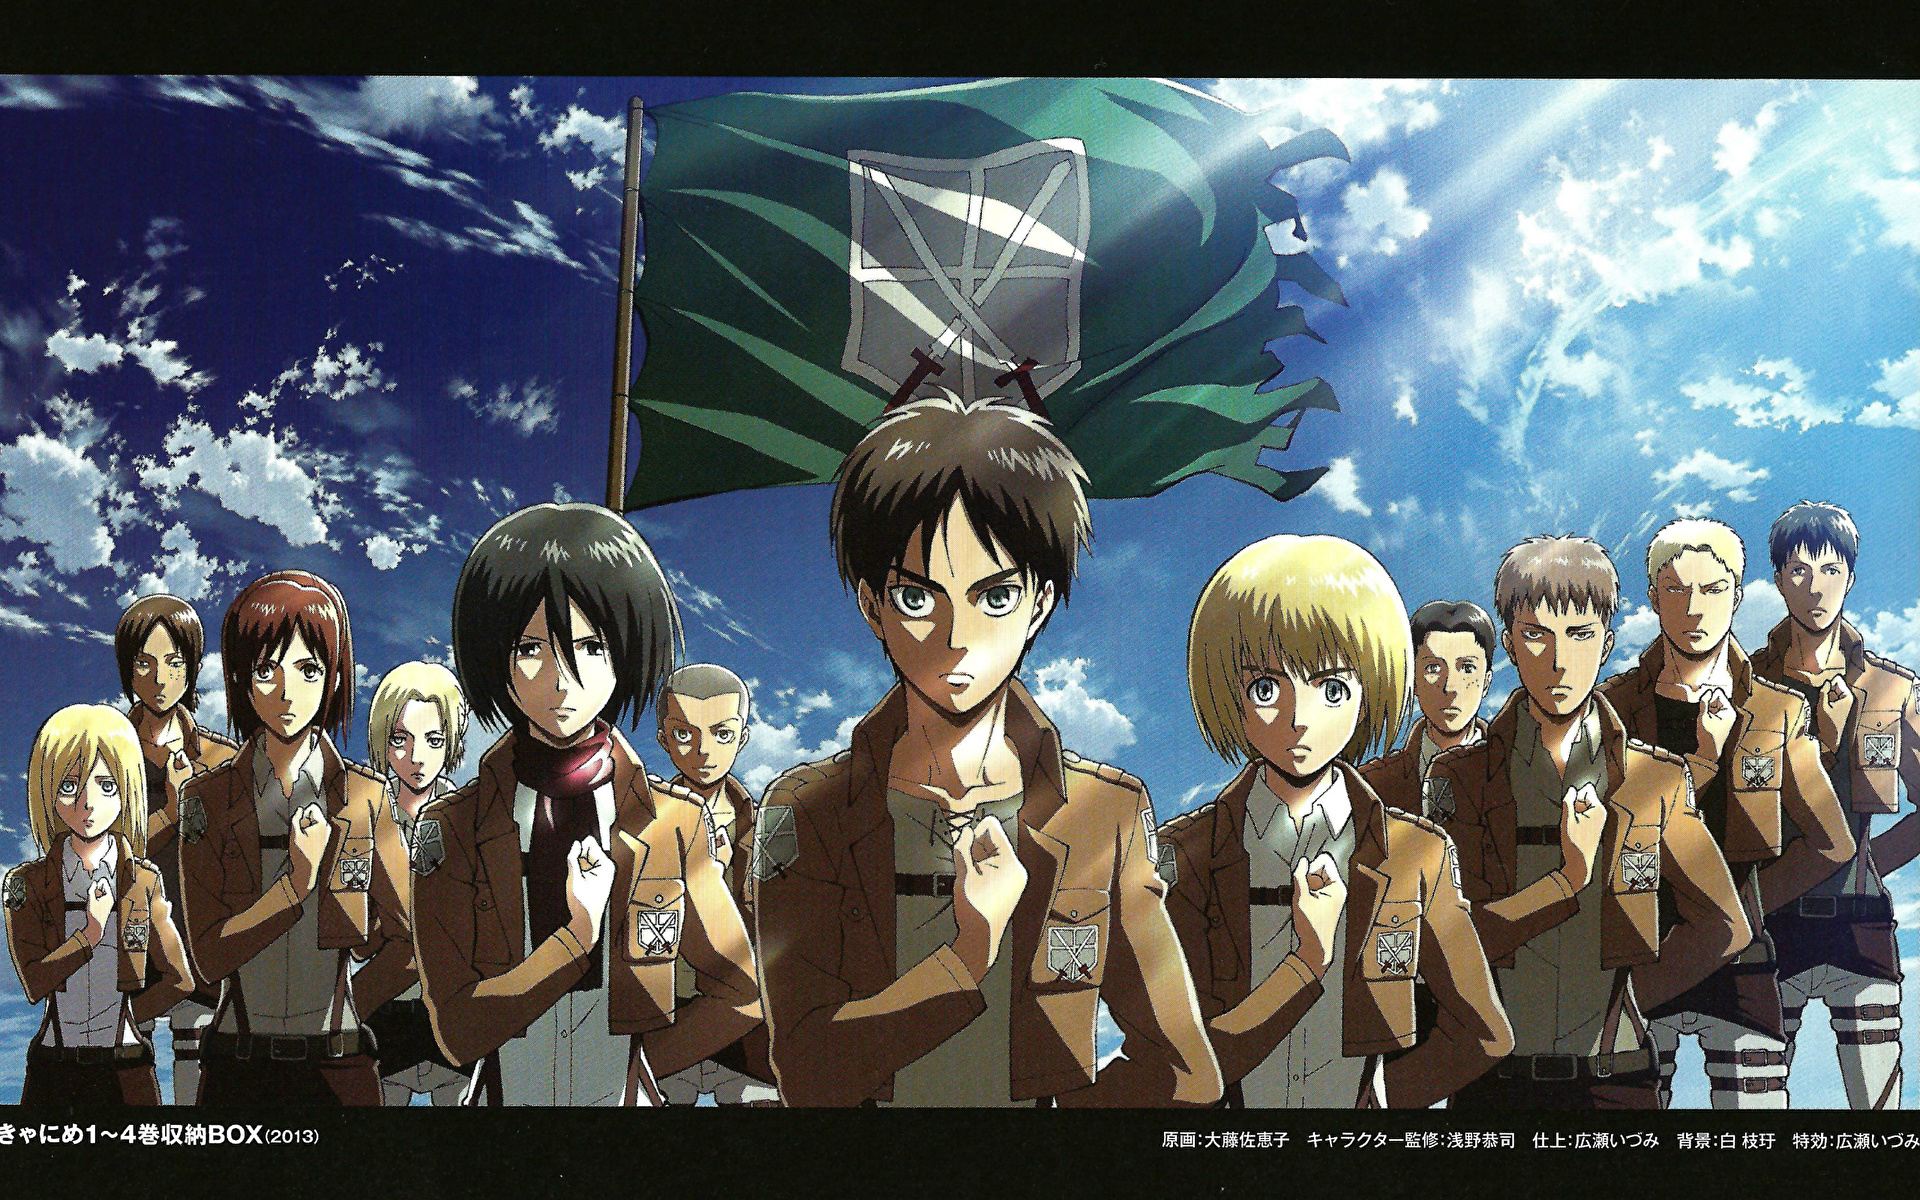 Attack on titan manga hi-res stock photography and images - Alamy